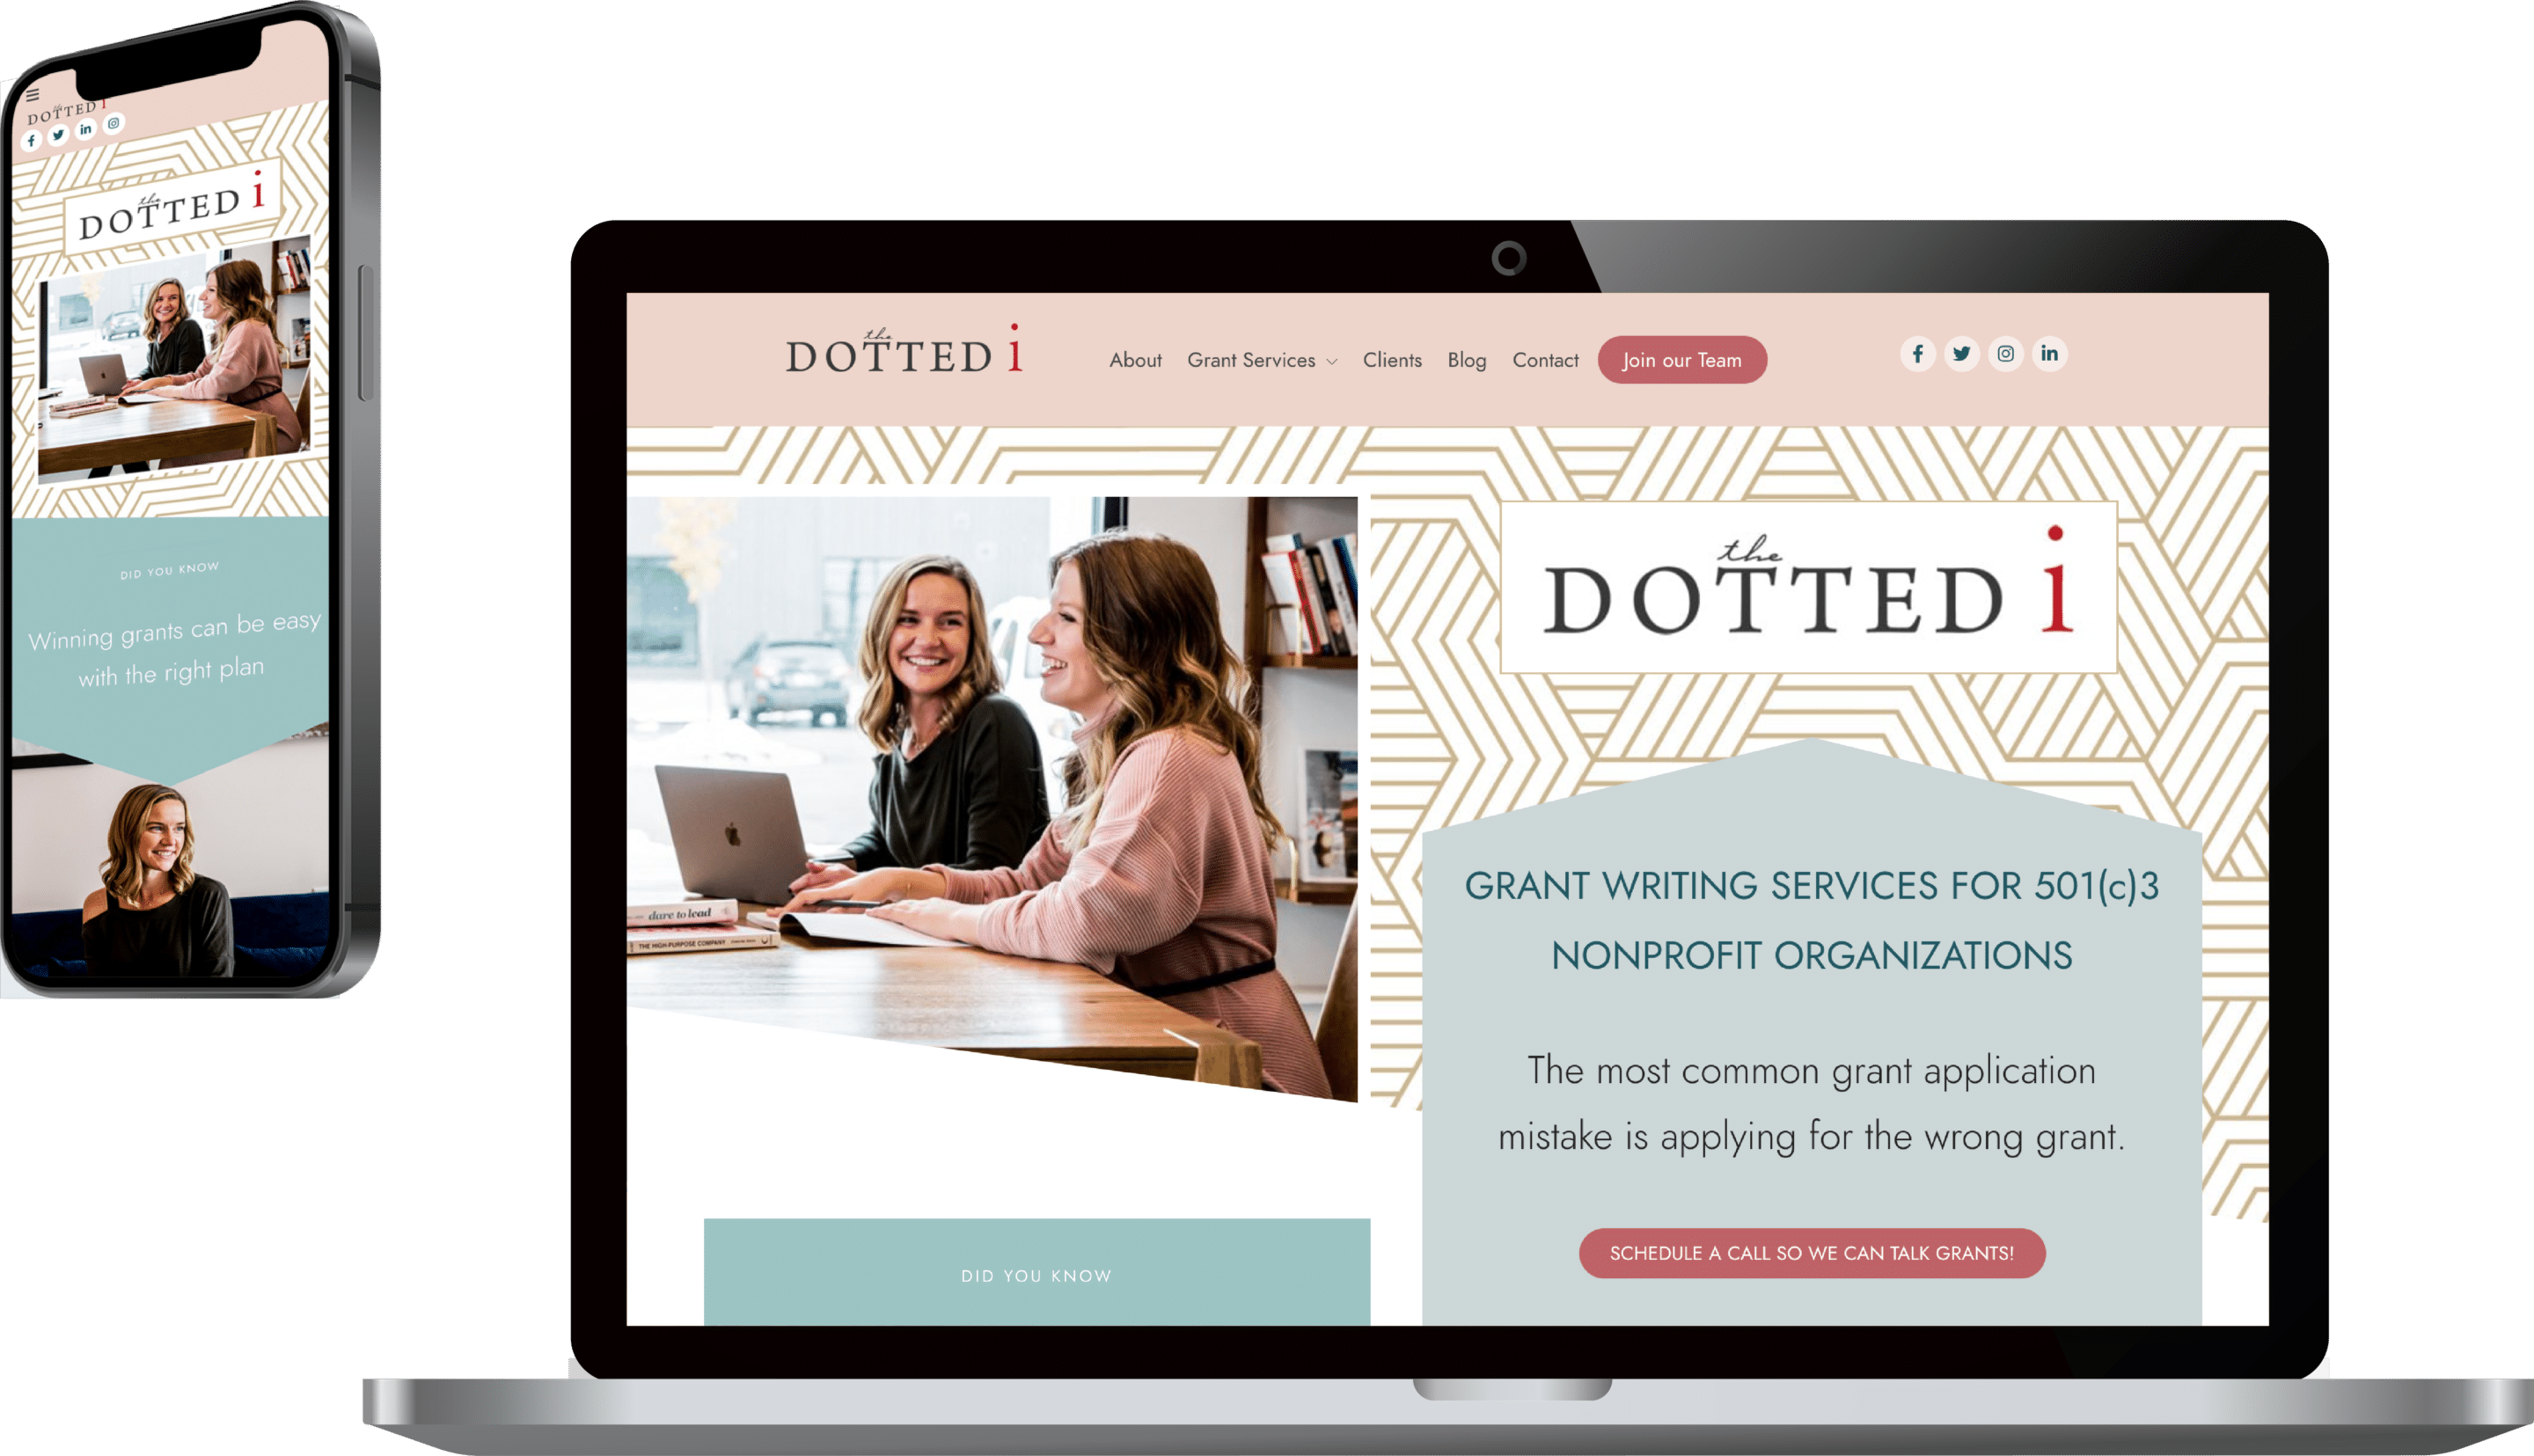 Website showcase for a grant writing services based in Bozeman Montana